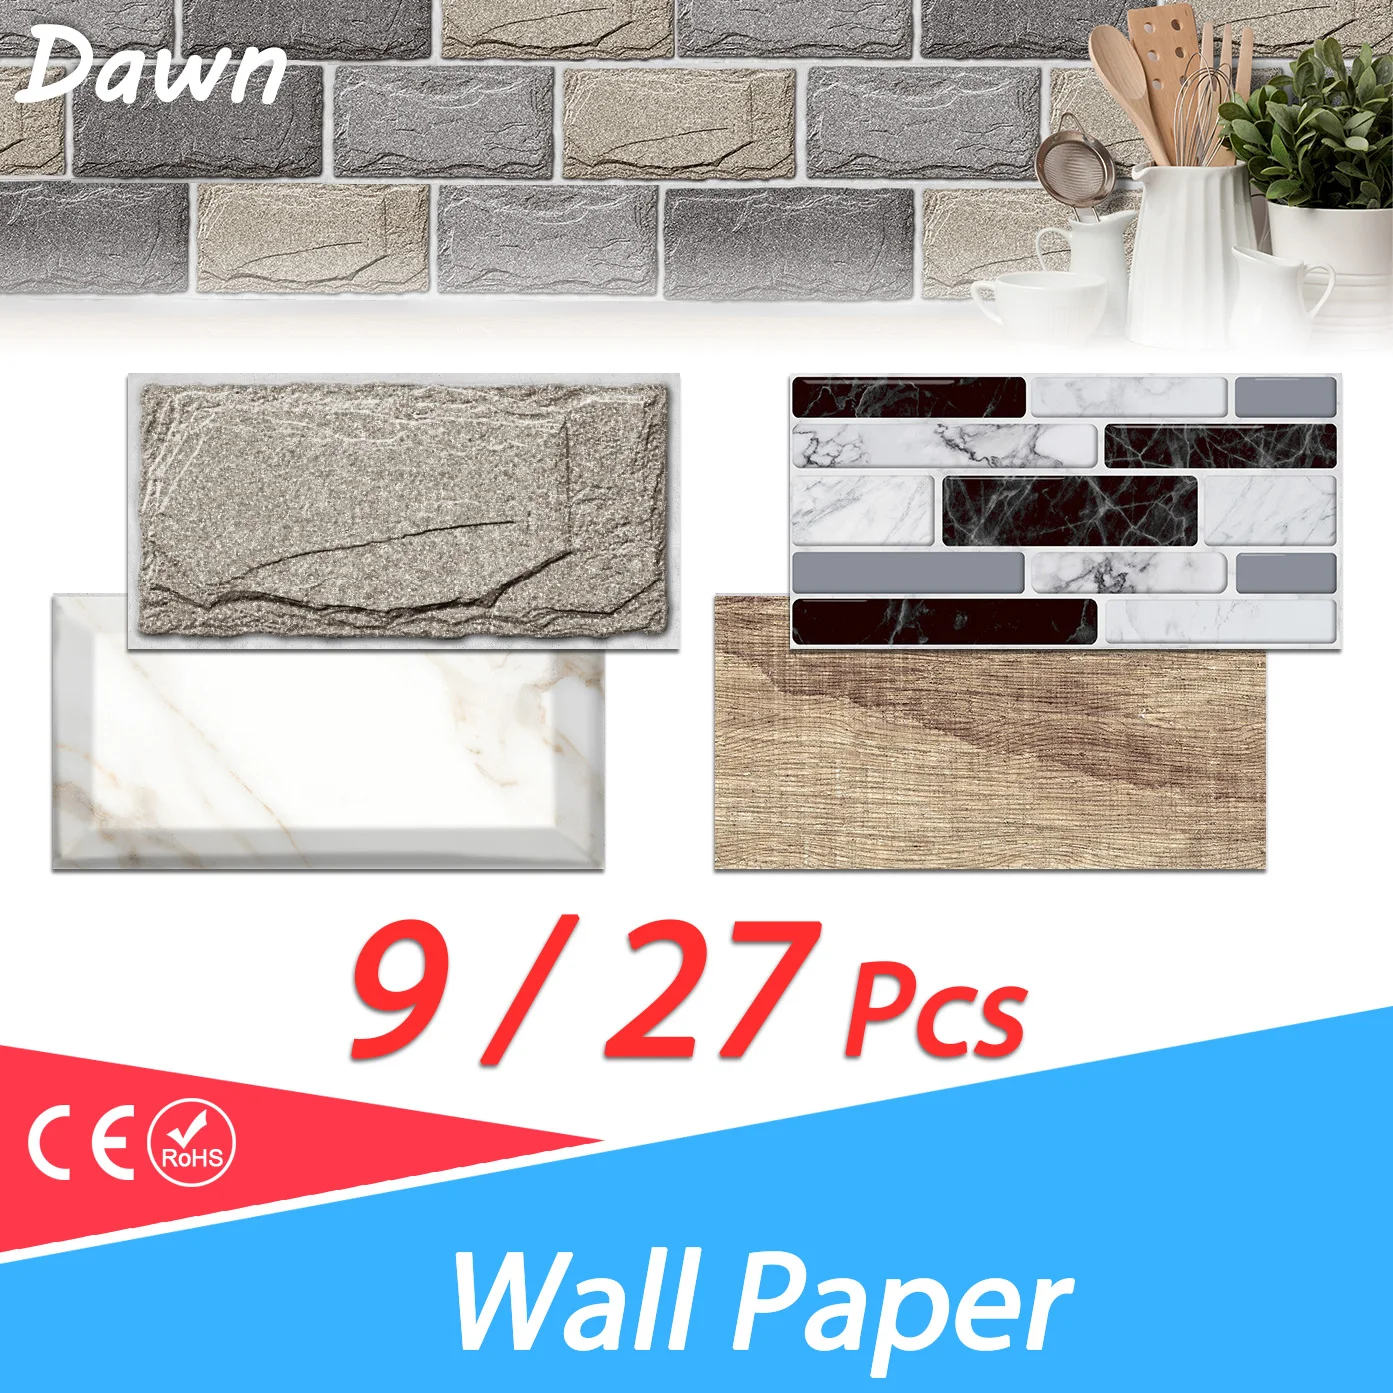 20x10cm Vintage tile sticker Modern Wall Sticker Waterproof Self-adhesive wall paper for Living room Kitchen Bathroom Home Decor